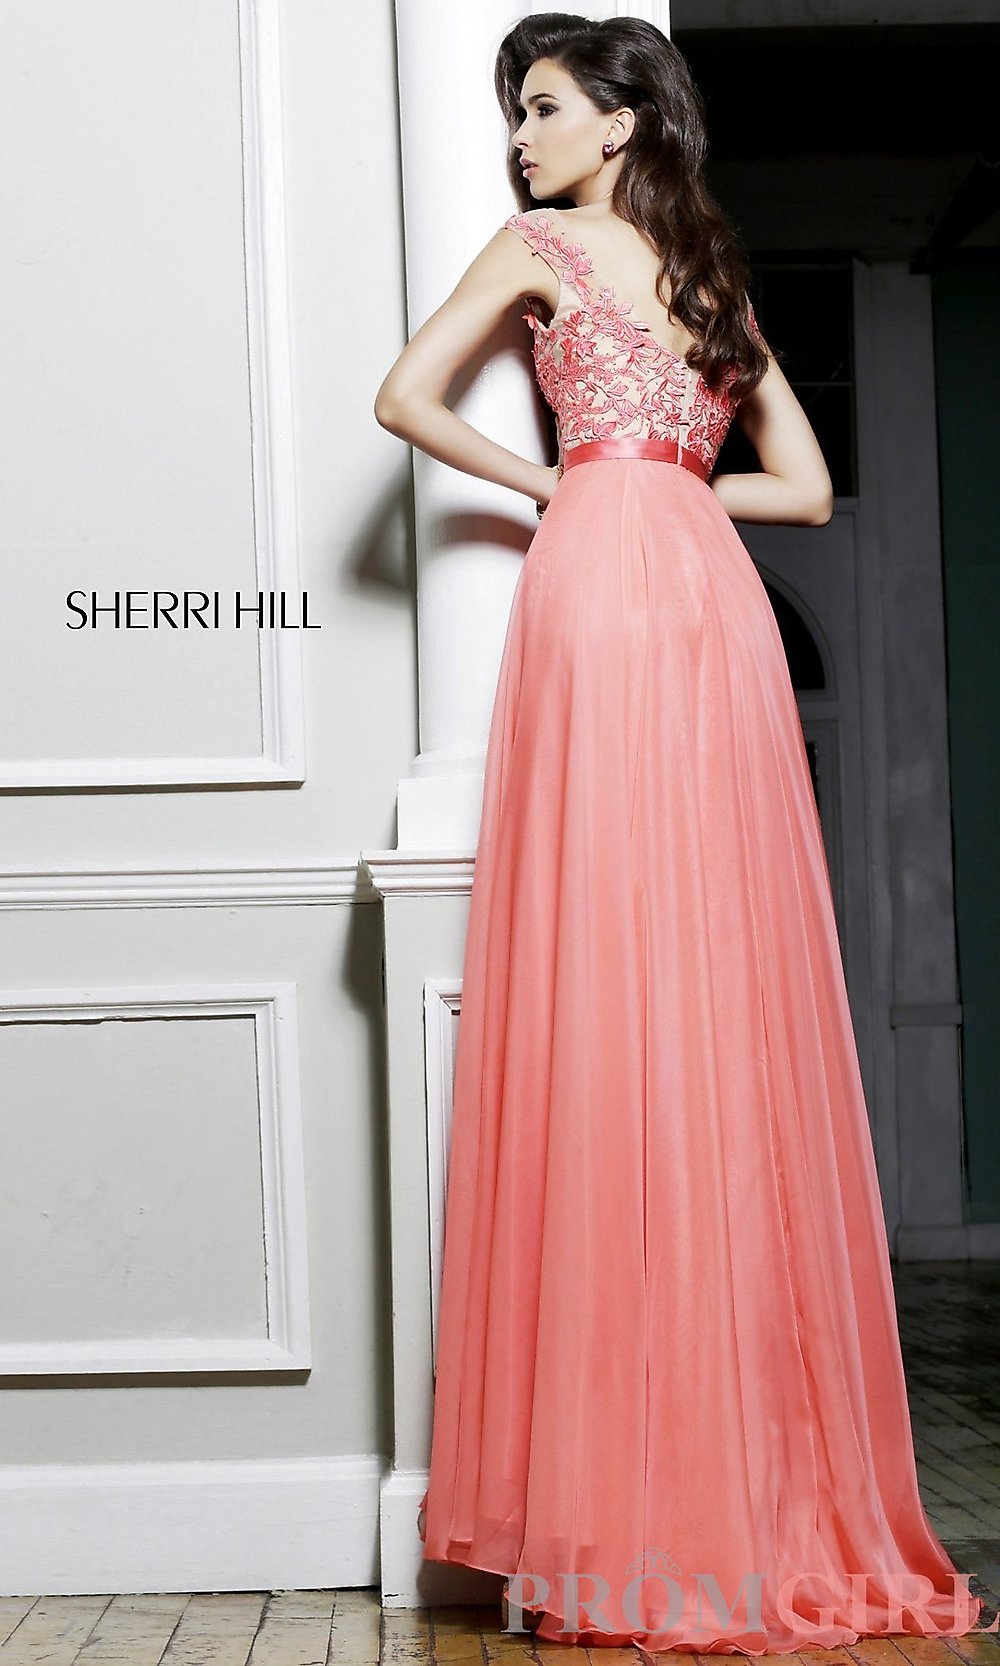 Latest Fancy Gowns, Prom and Cocktail dresses for Weddings and Parties 2014-2015 (5)